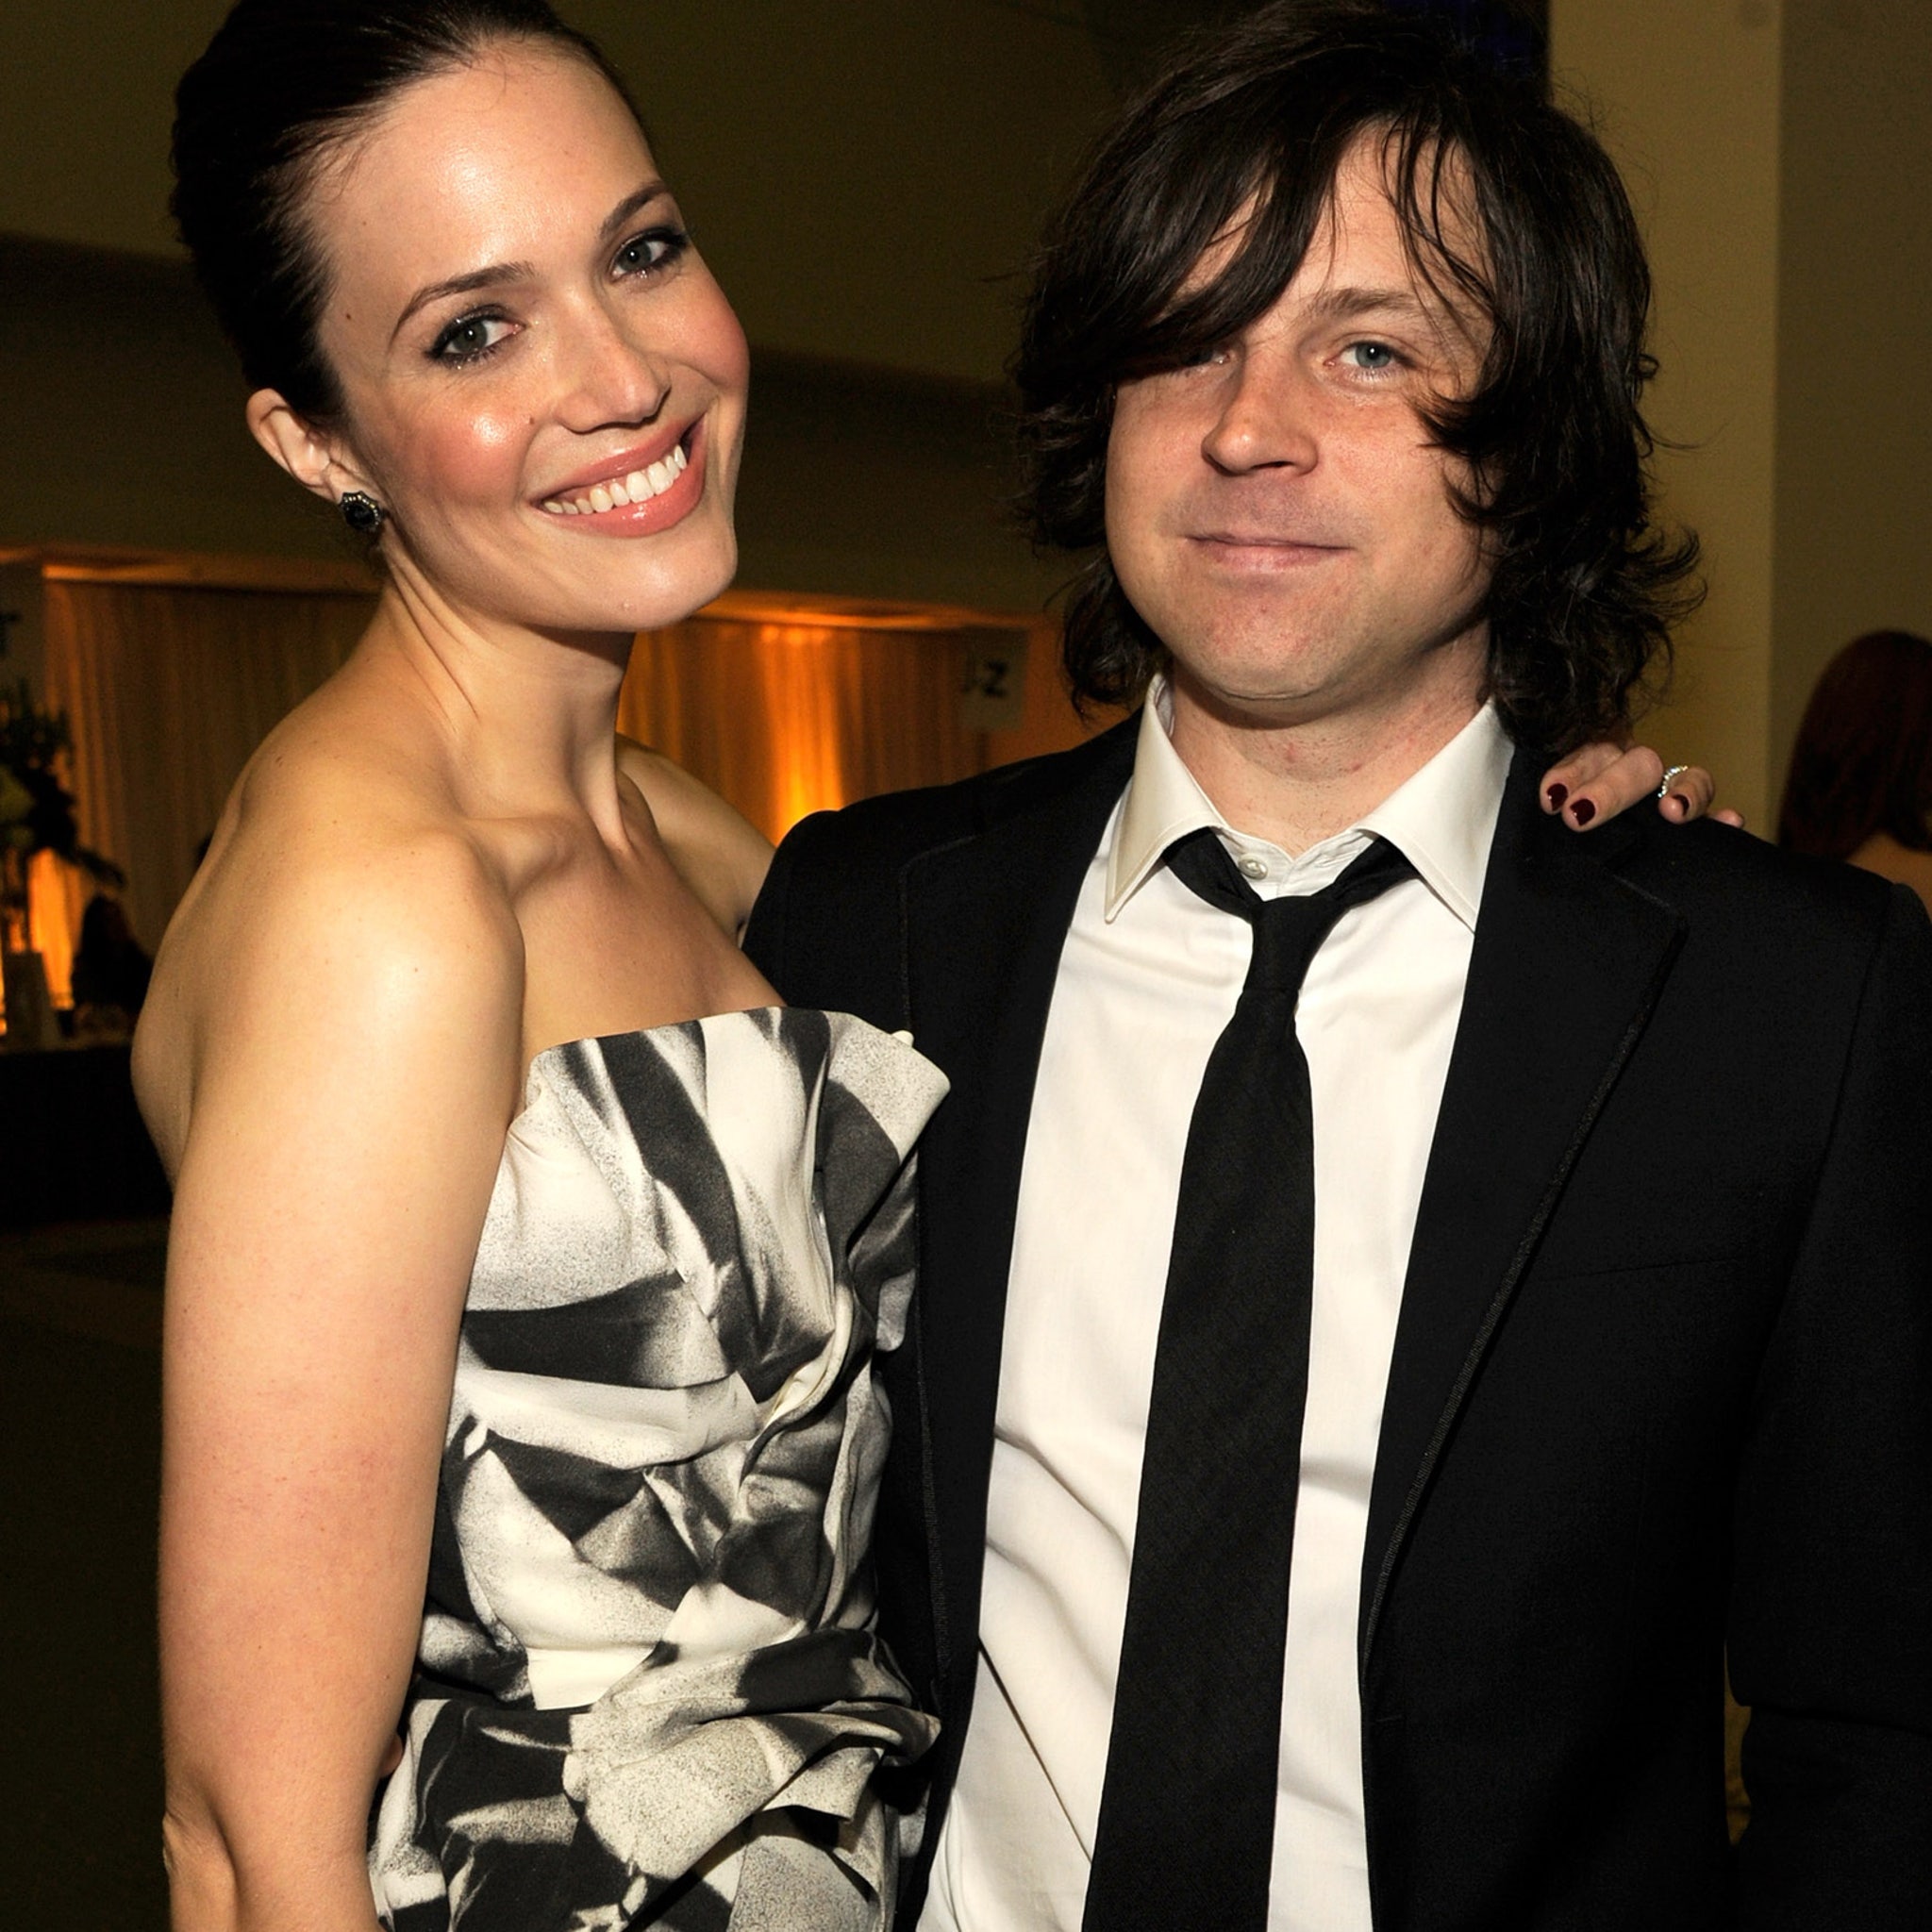 Ryan Adams Apologizes After Joking He Was High On Painkillers At Wedding To Mandy Moore